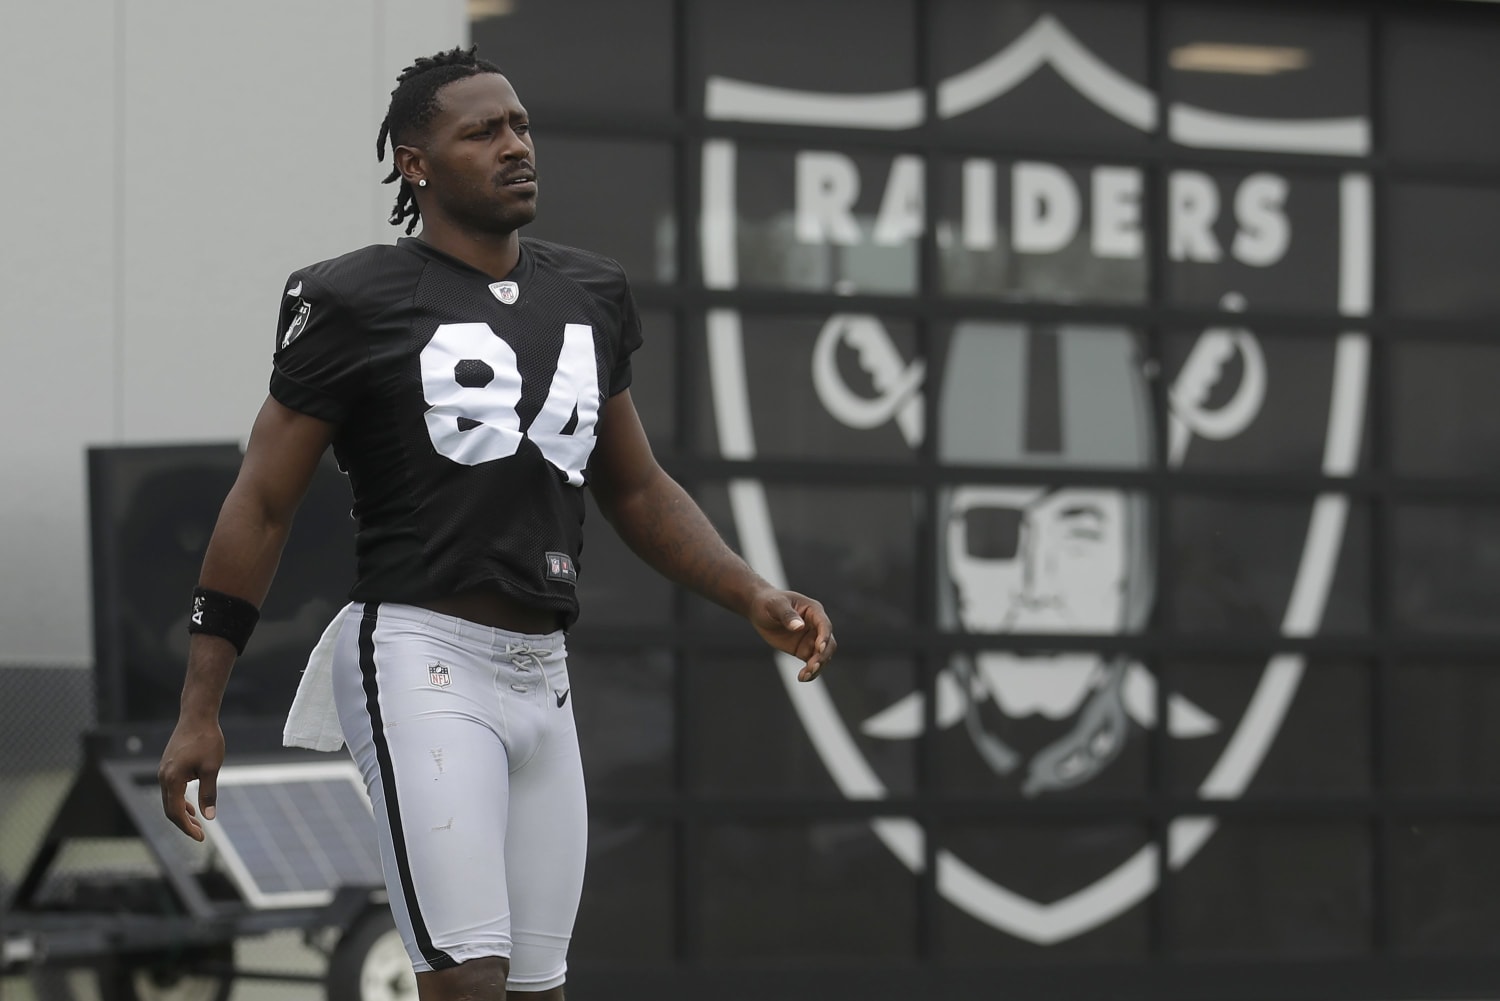 Oakland Raiders release star wide receiver